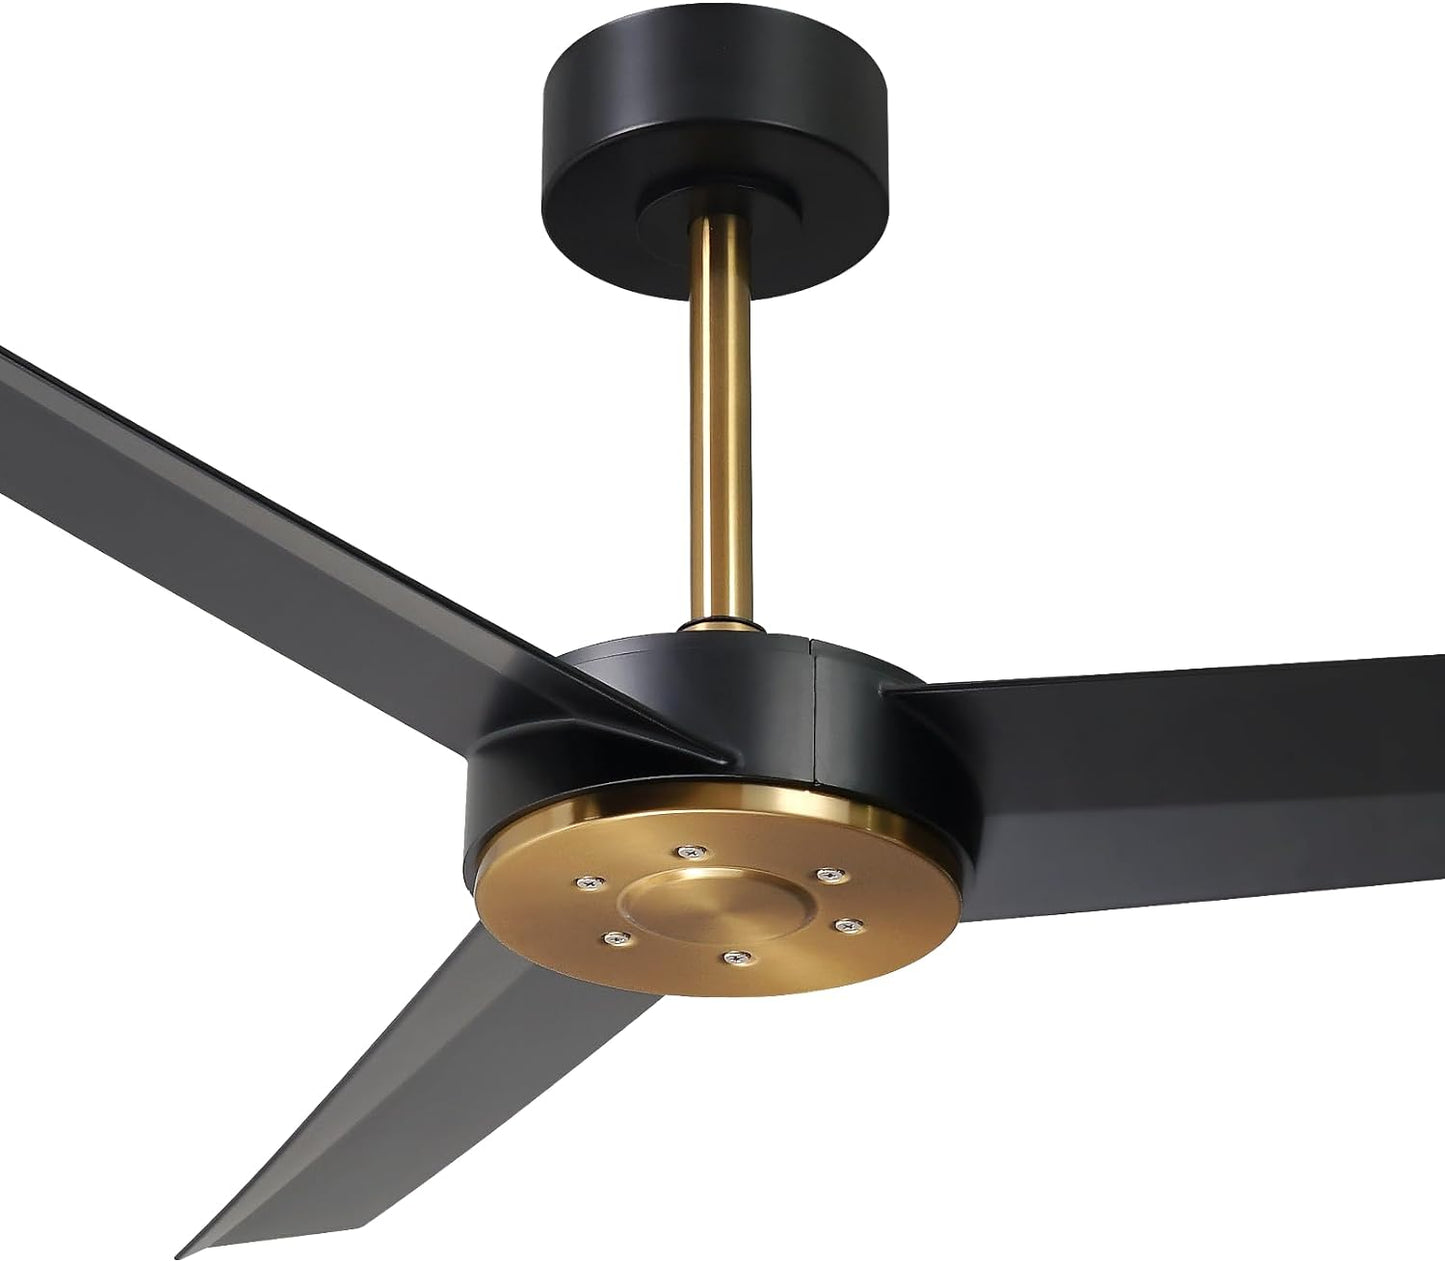 LEEAGLEGRY 52 Inch Ceiling Fan No Light, Black Ceiling Fan Without Light, Modern Gold Brass Copper Fans with Remote DC Motor Reversible for Bedroom Living Room Kitchen Outdoor Patio P